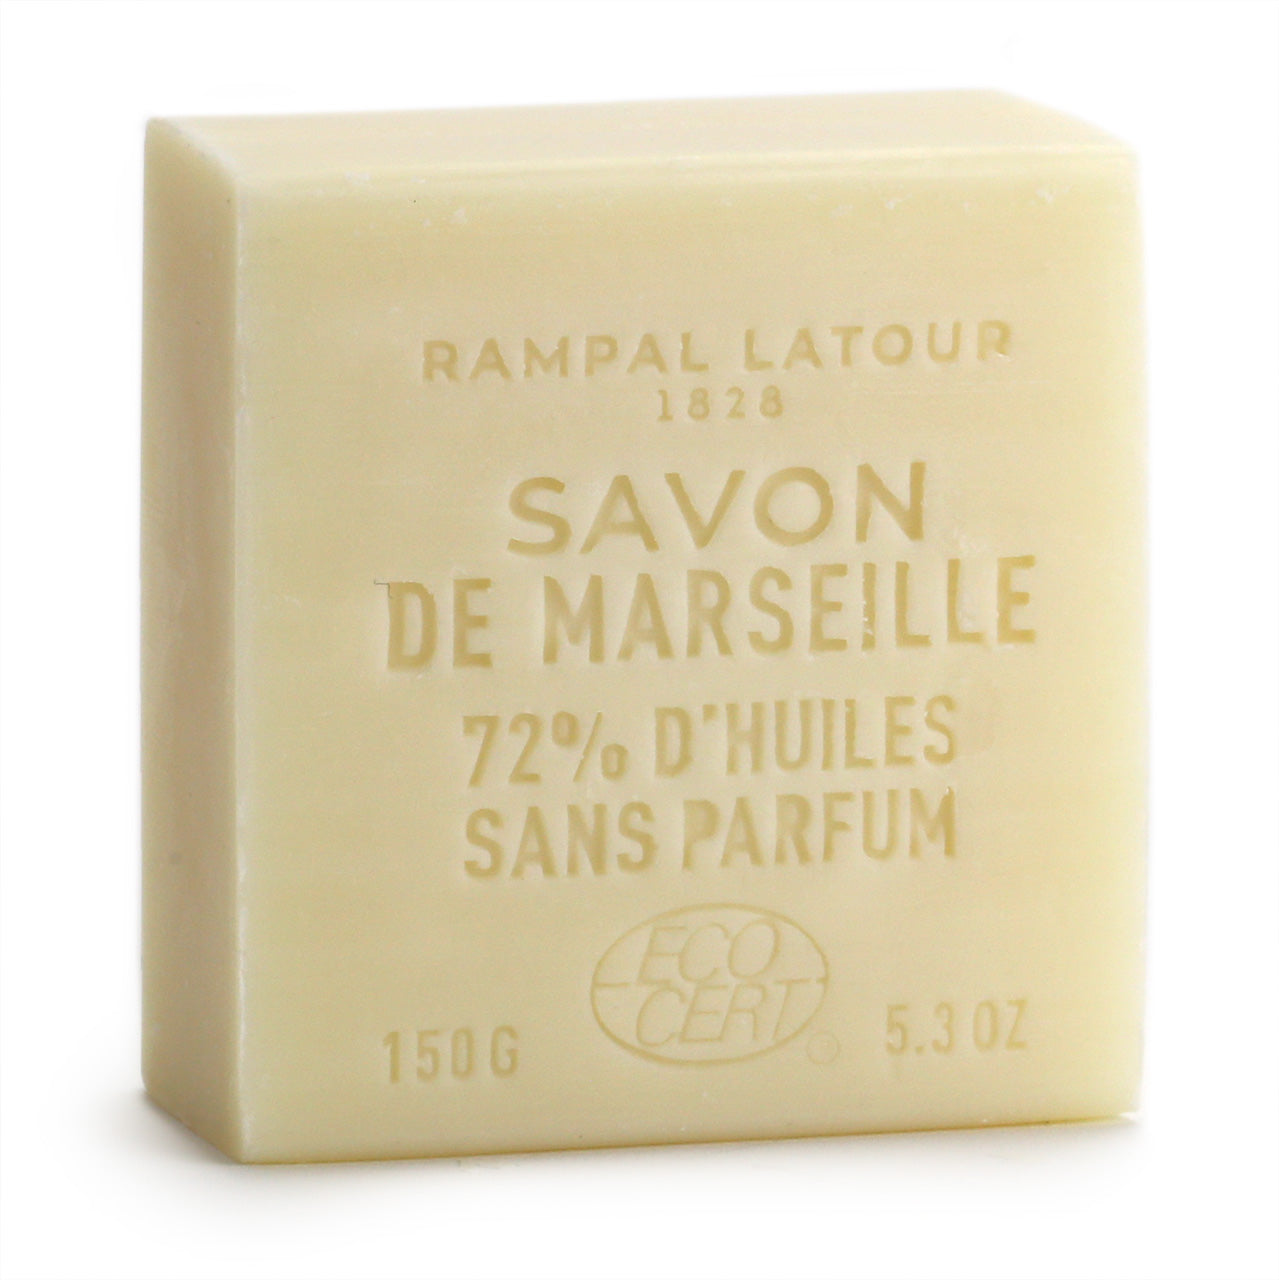 150g block of Rampal Latour soap - Extra Pur - Marseille, made in France